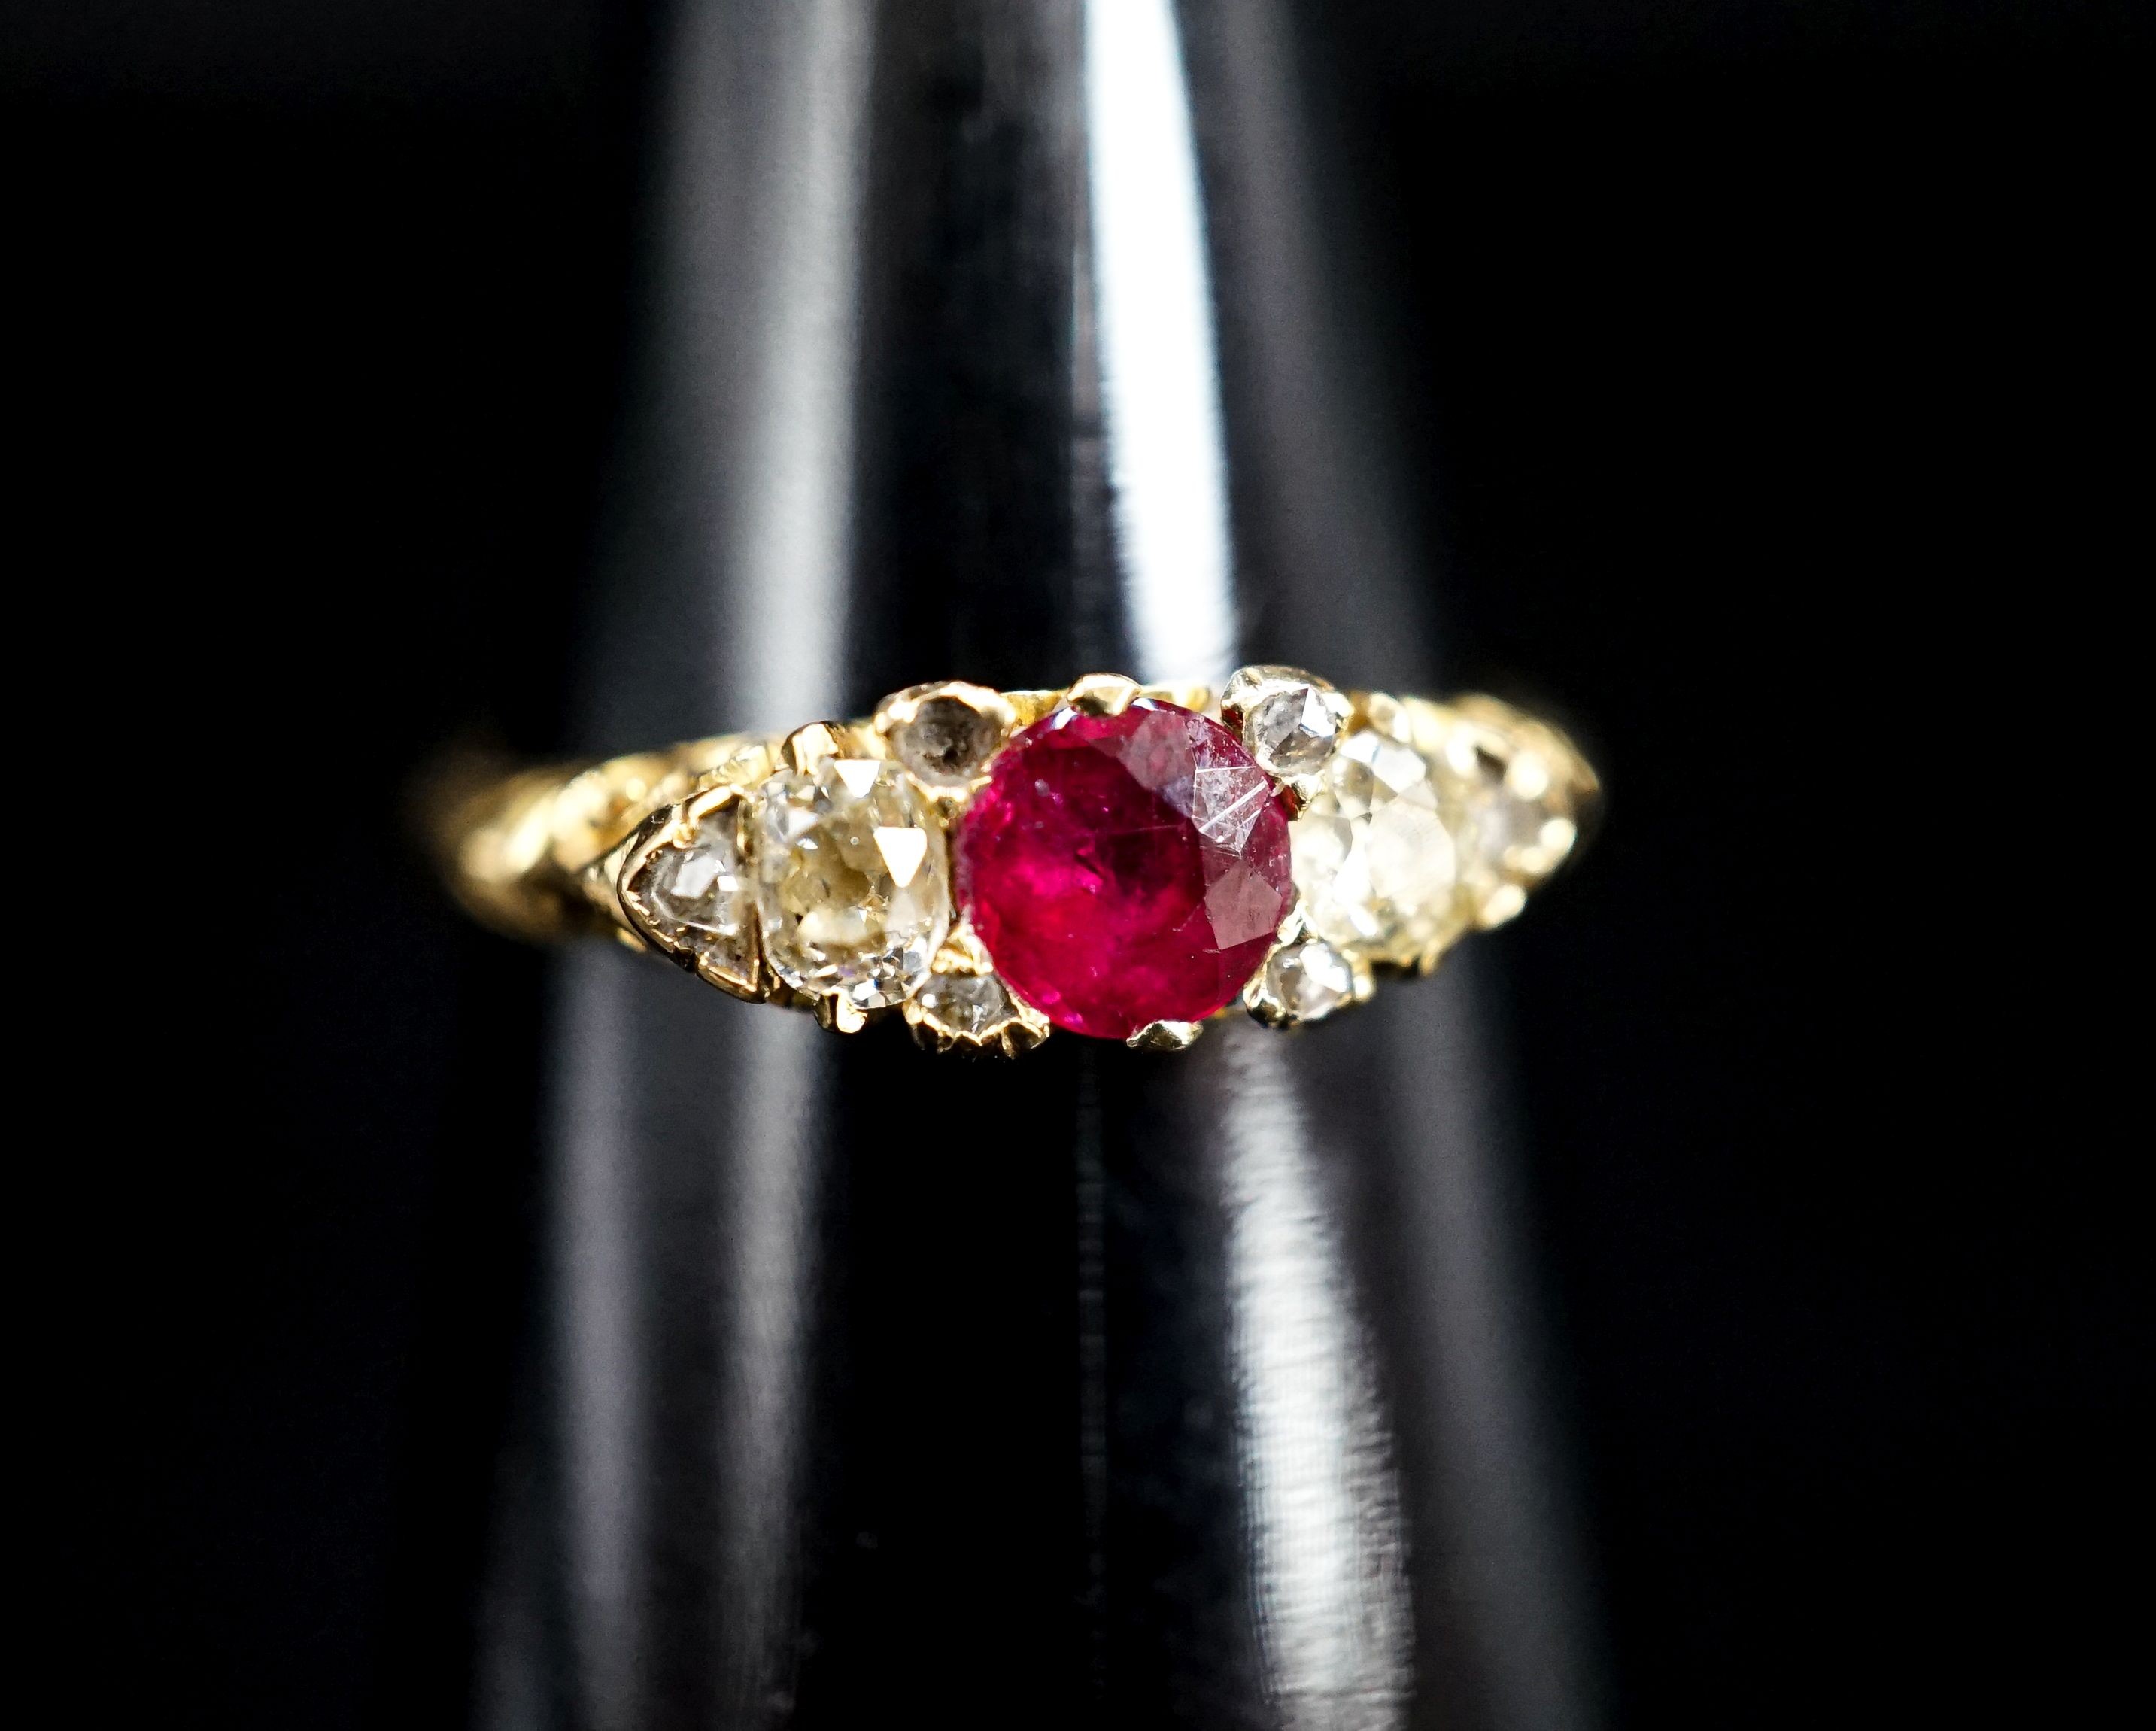 An Edwardian 18ct gold, ruby and diamond three stone ring, with diamond chip spacers (one missing), size N, gross weight 3.3 grams.